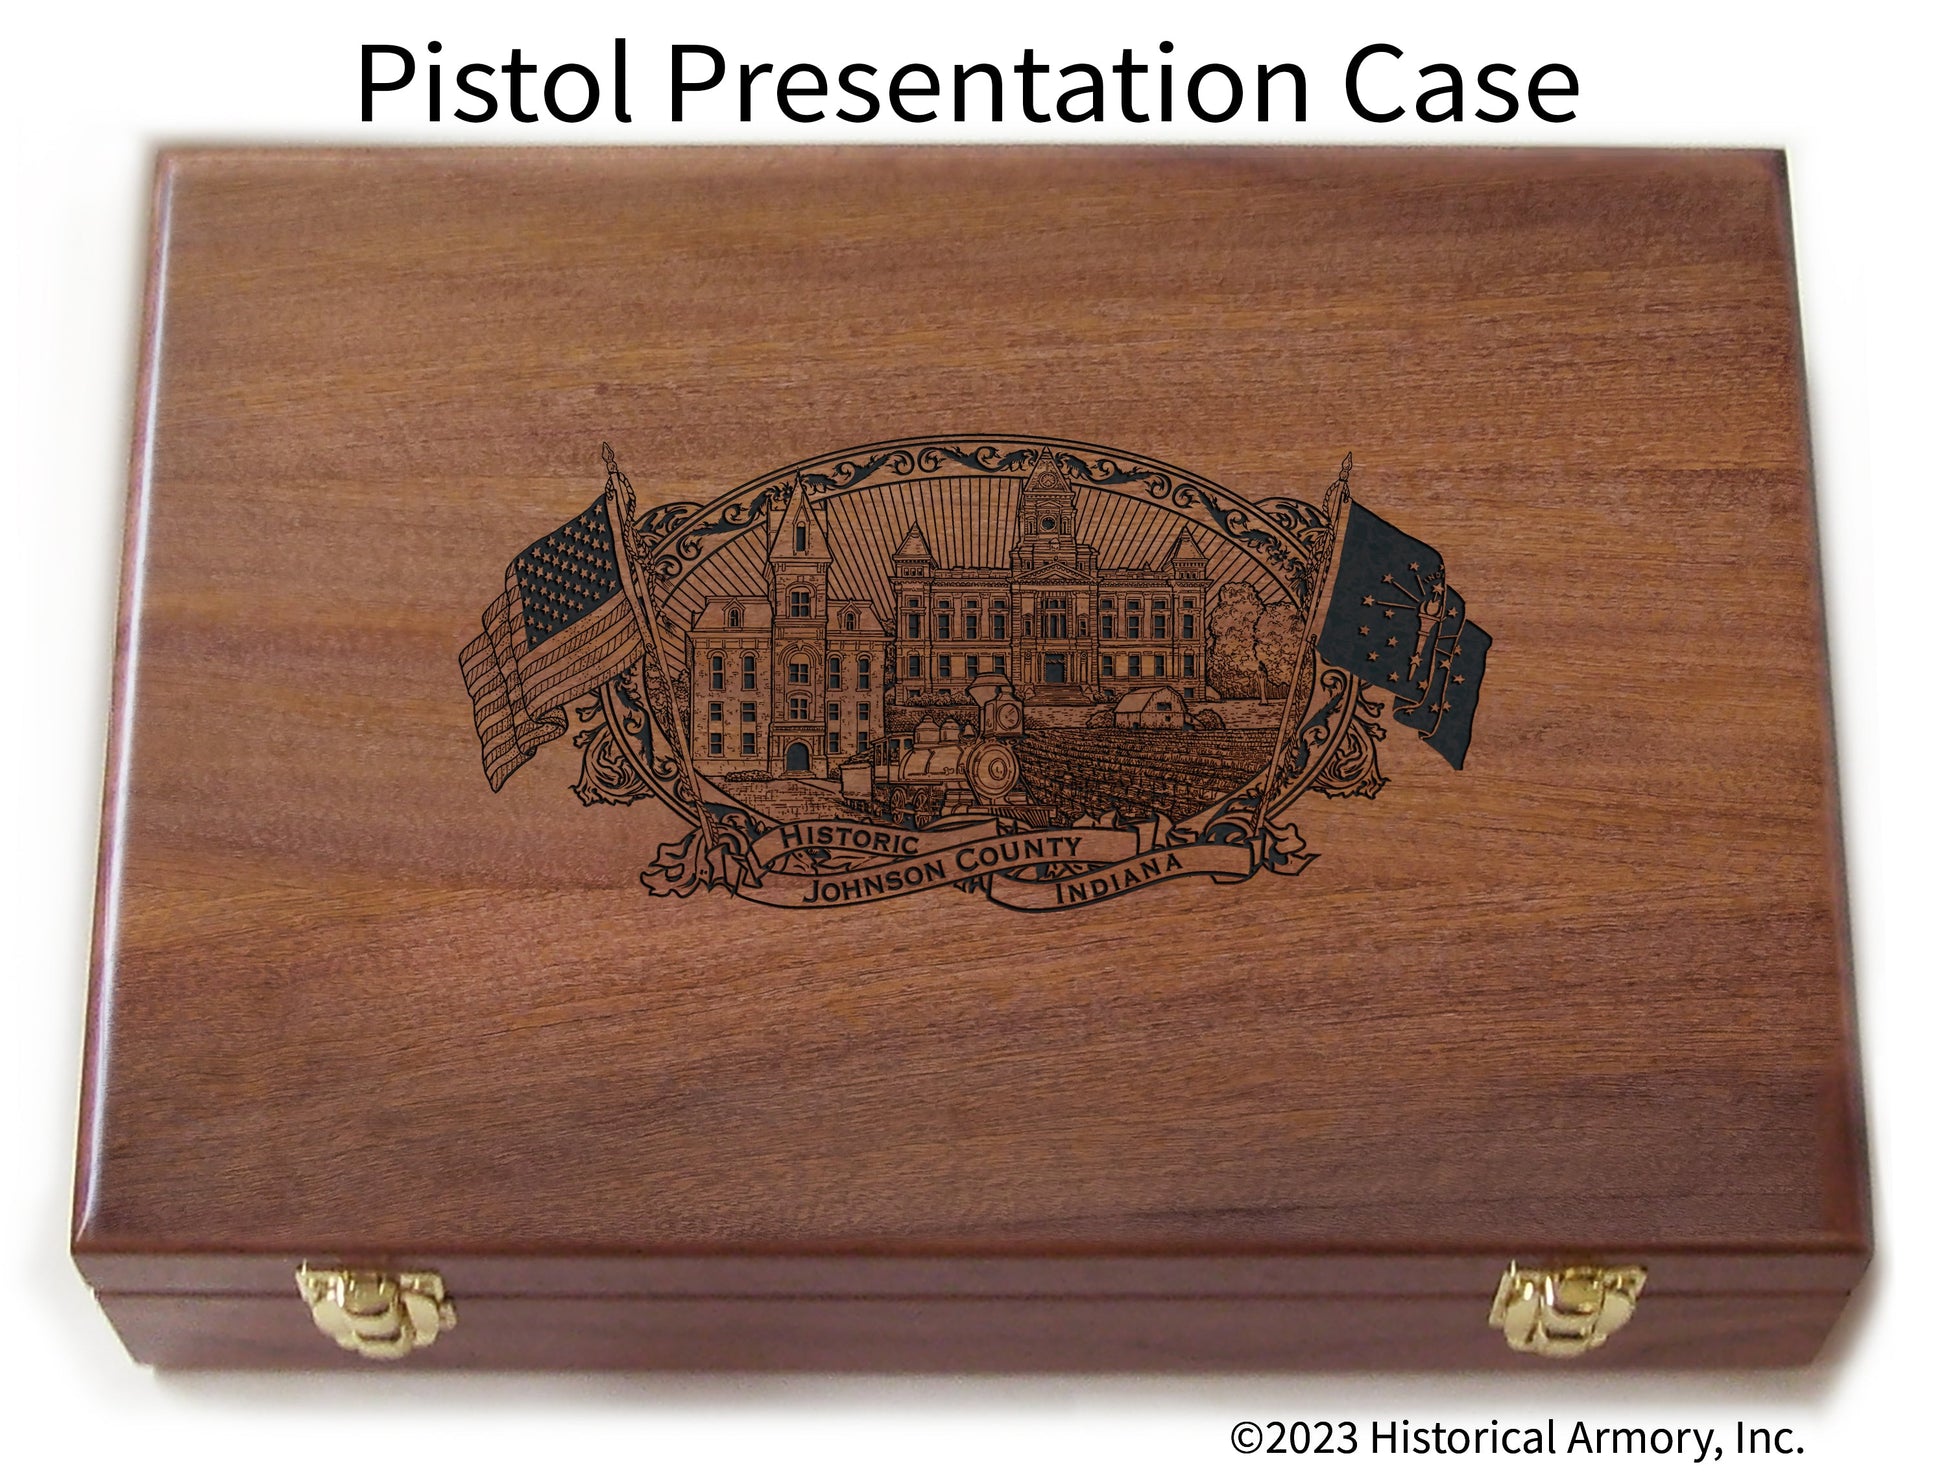 Johnson County Indiana Engraved .45 Auto Ruger 1911 Presentation Case